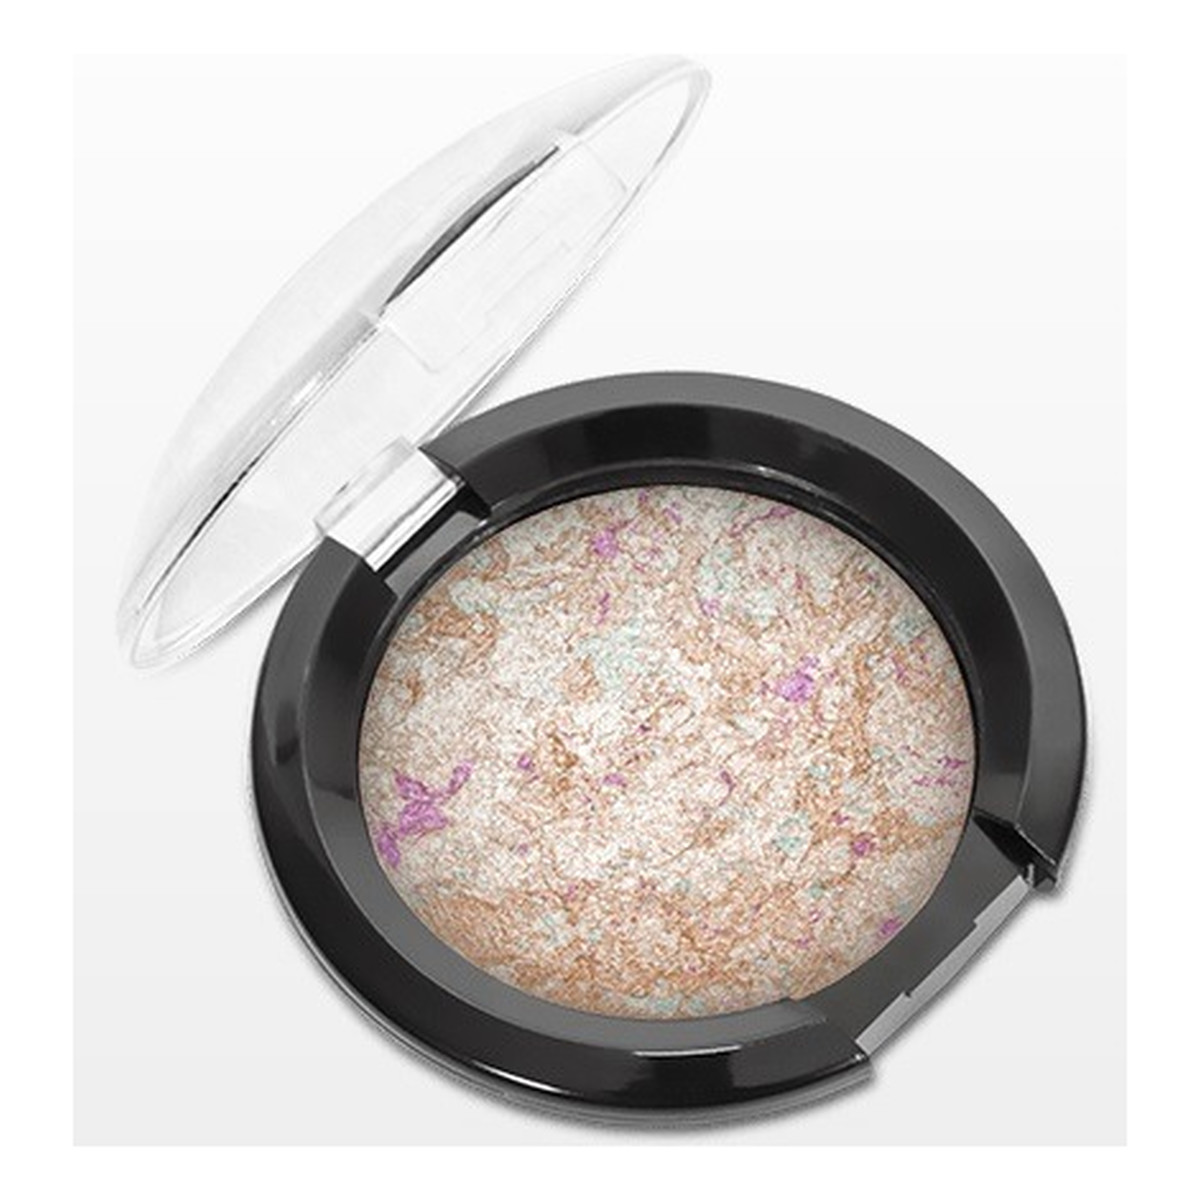 Affect MINERAL BAKED POWDER Mineralny Puder Wypiekany (T-0003)